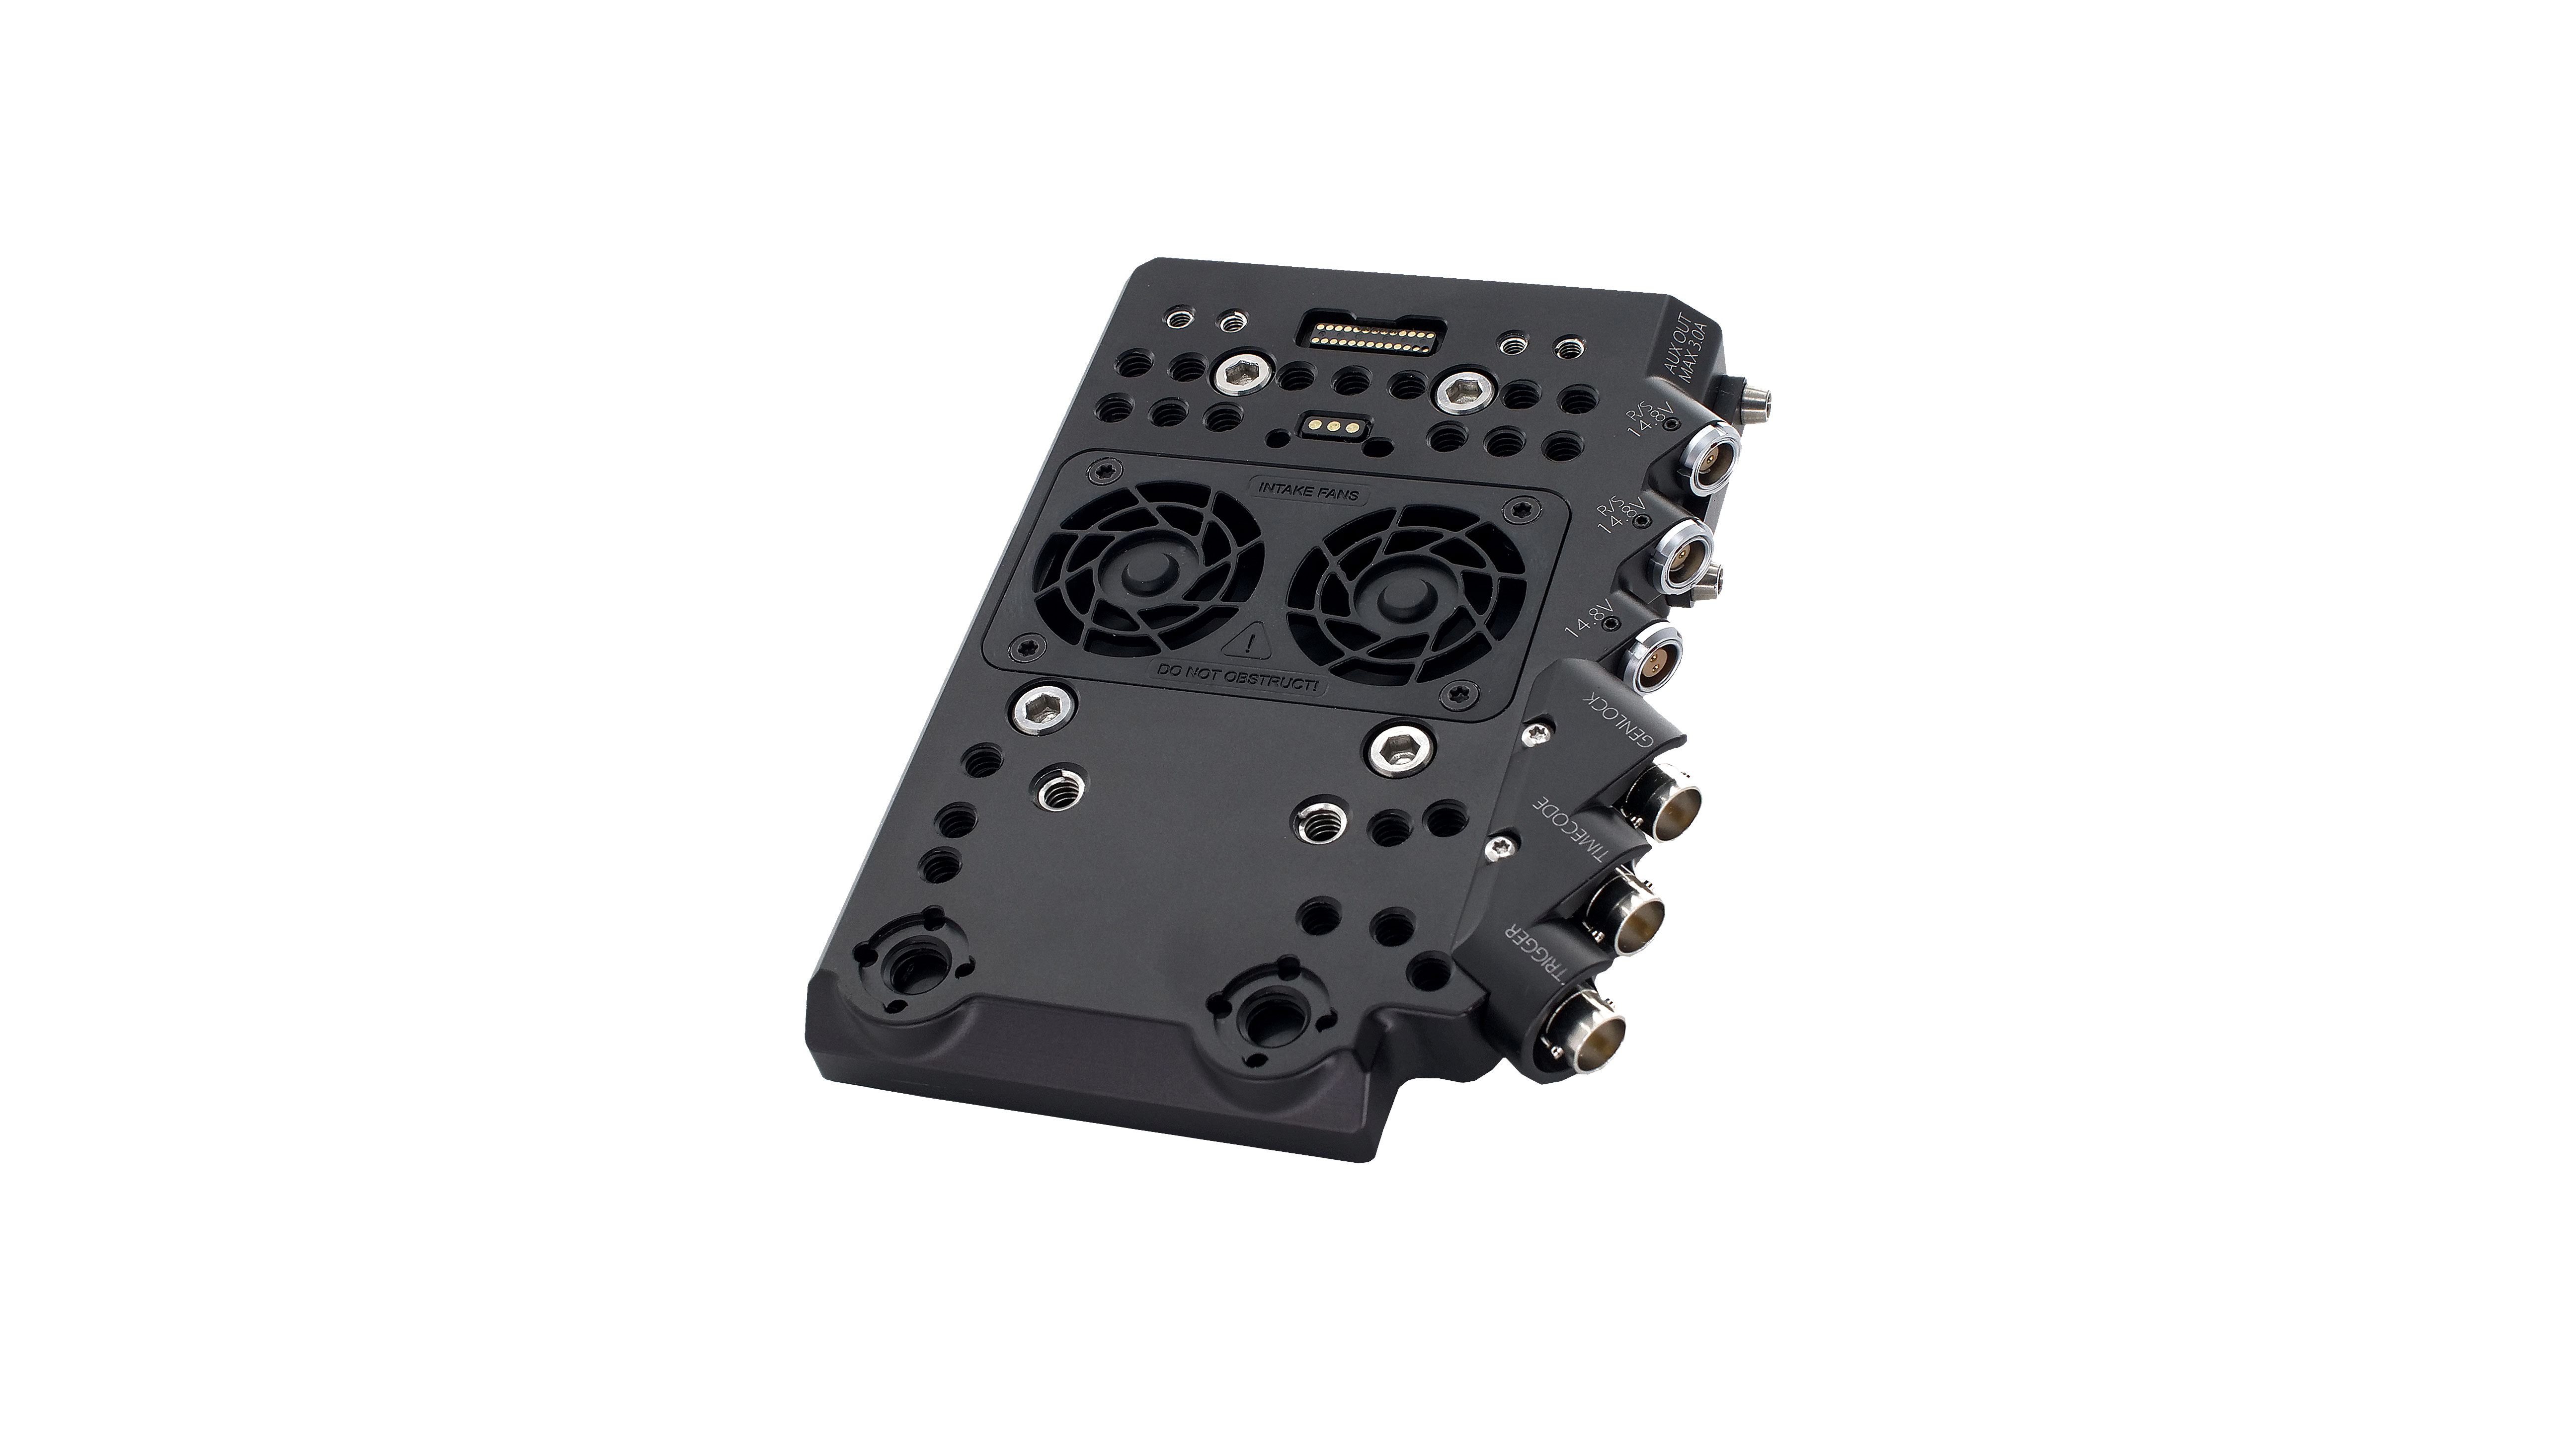 Top Plate for Red DSMC2 Camera Cage - B1 (Discontinued)